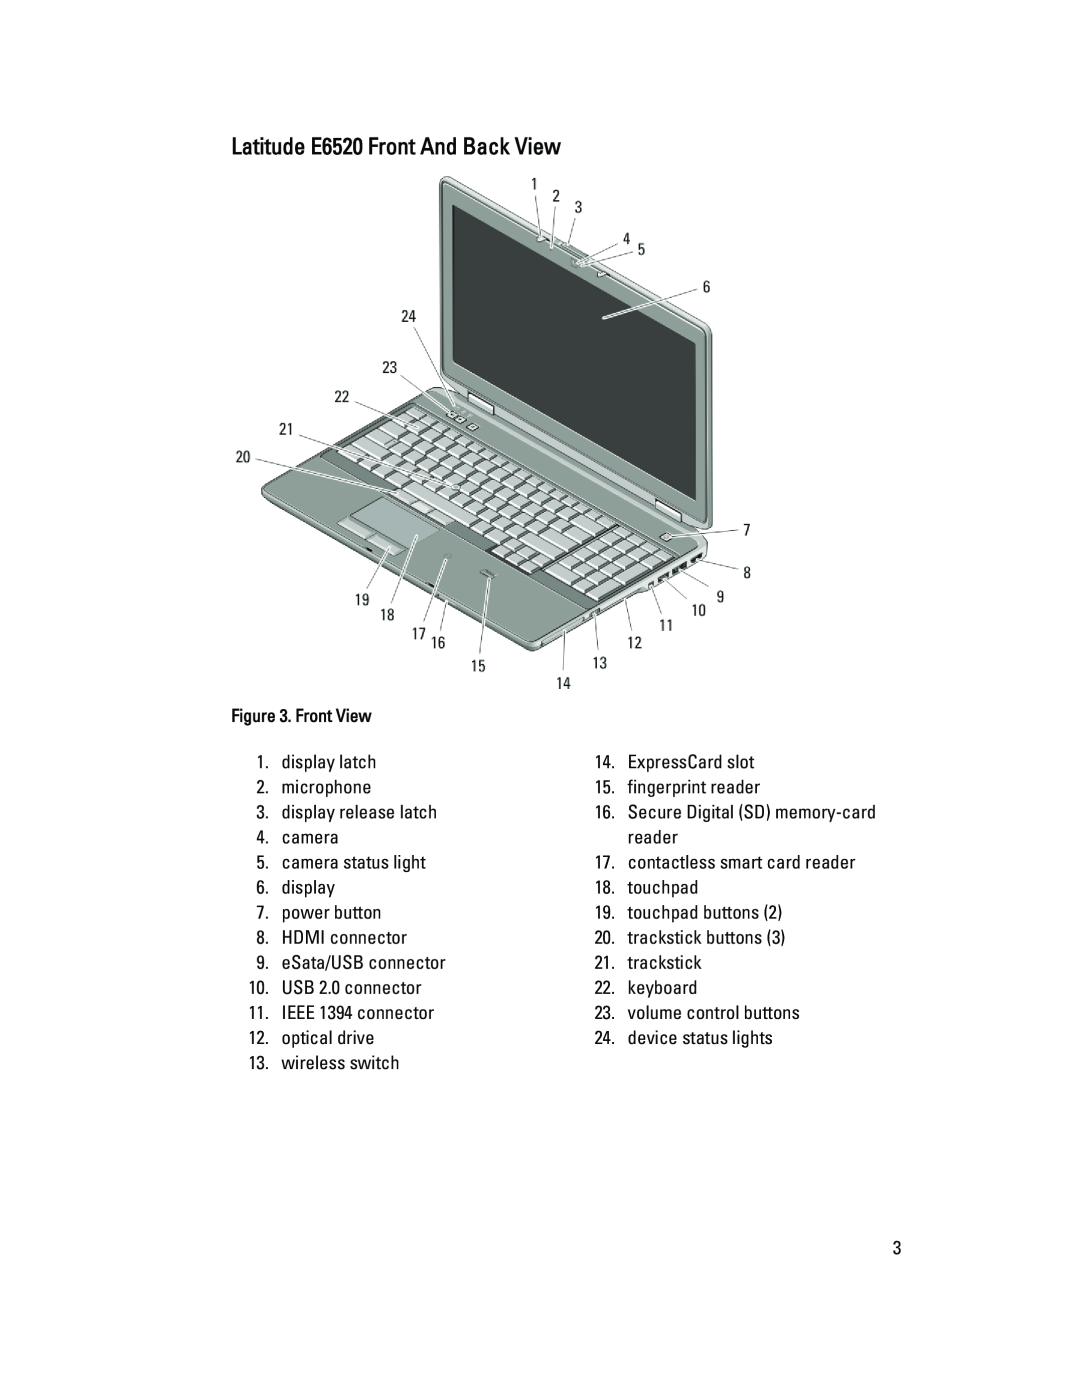 Dell manual Latitude E6520 Front And Back View, Front View 